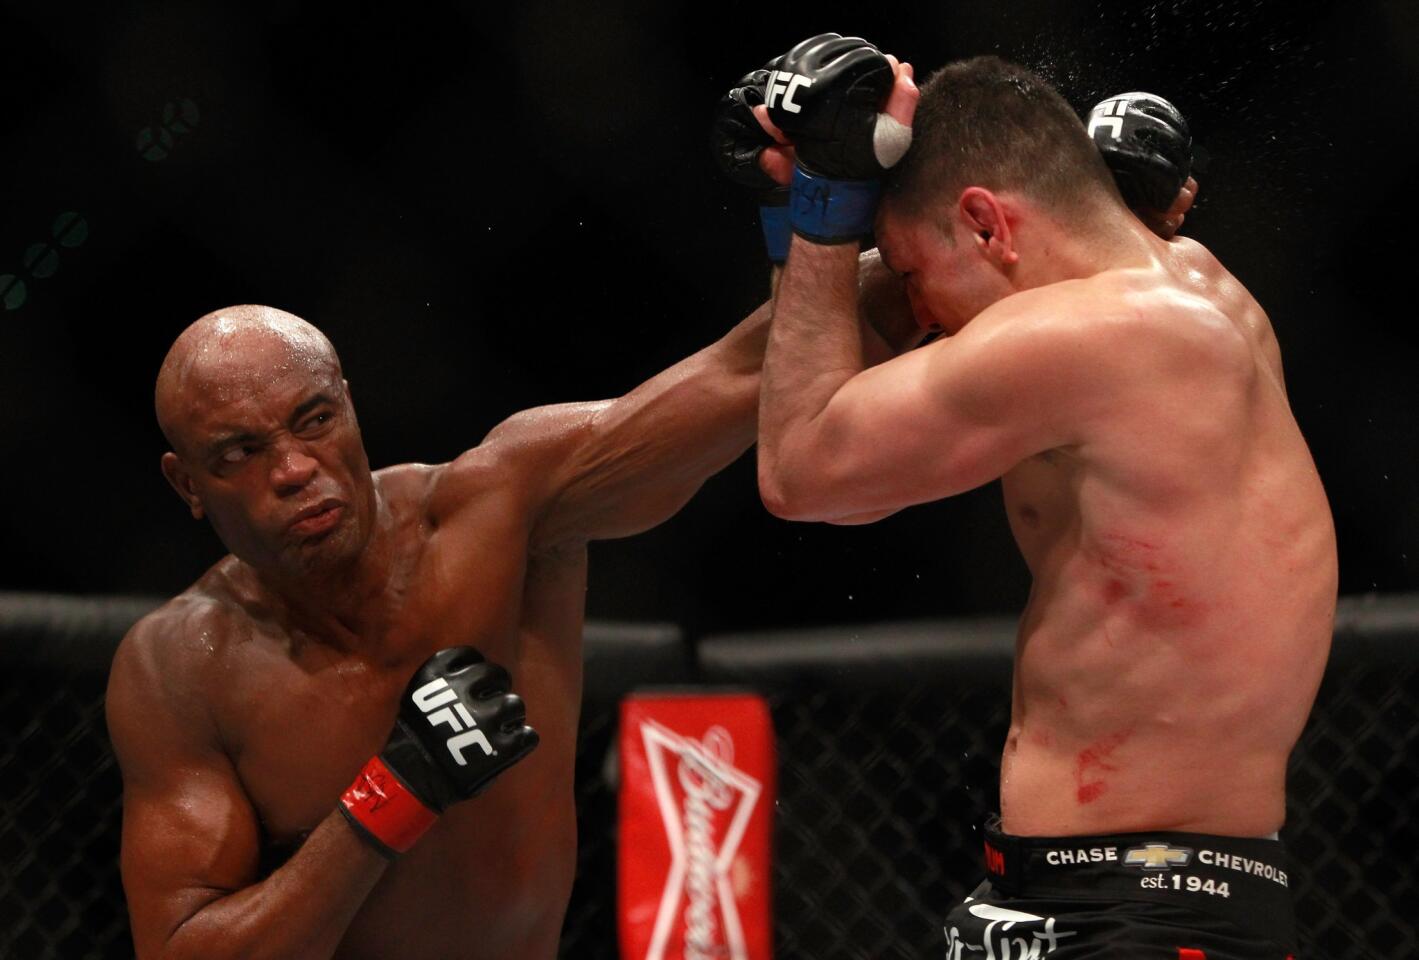 Anderson Silva lands a punch against Nick Diaz during their middleweight fight at UFC 183 on Saturday night at the MGM Grand Garden Arena in Las Vegas.